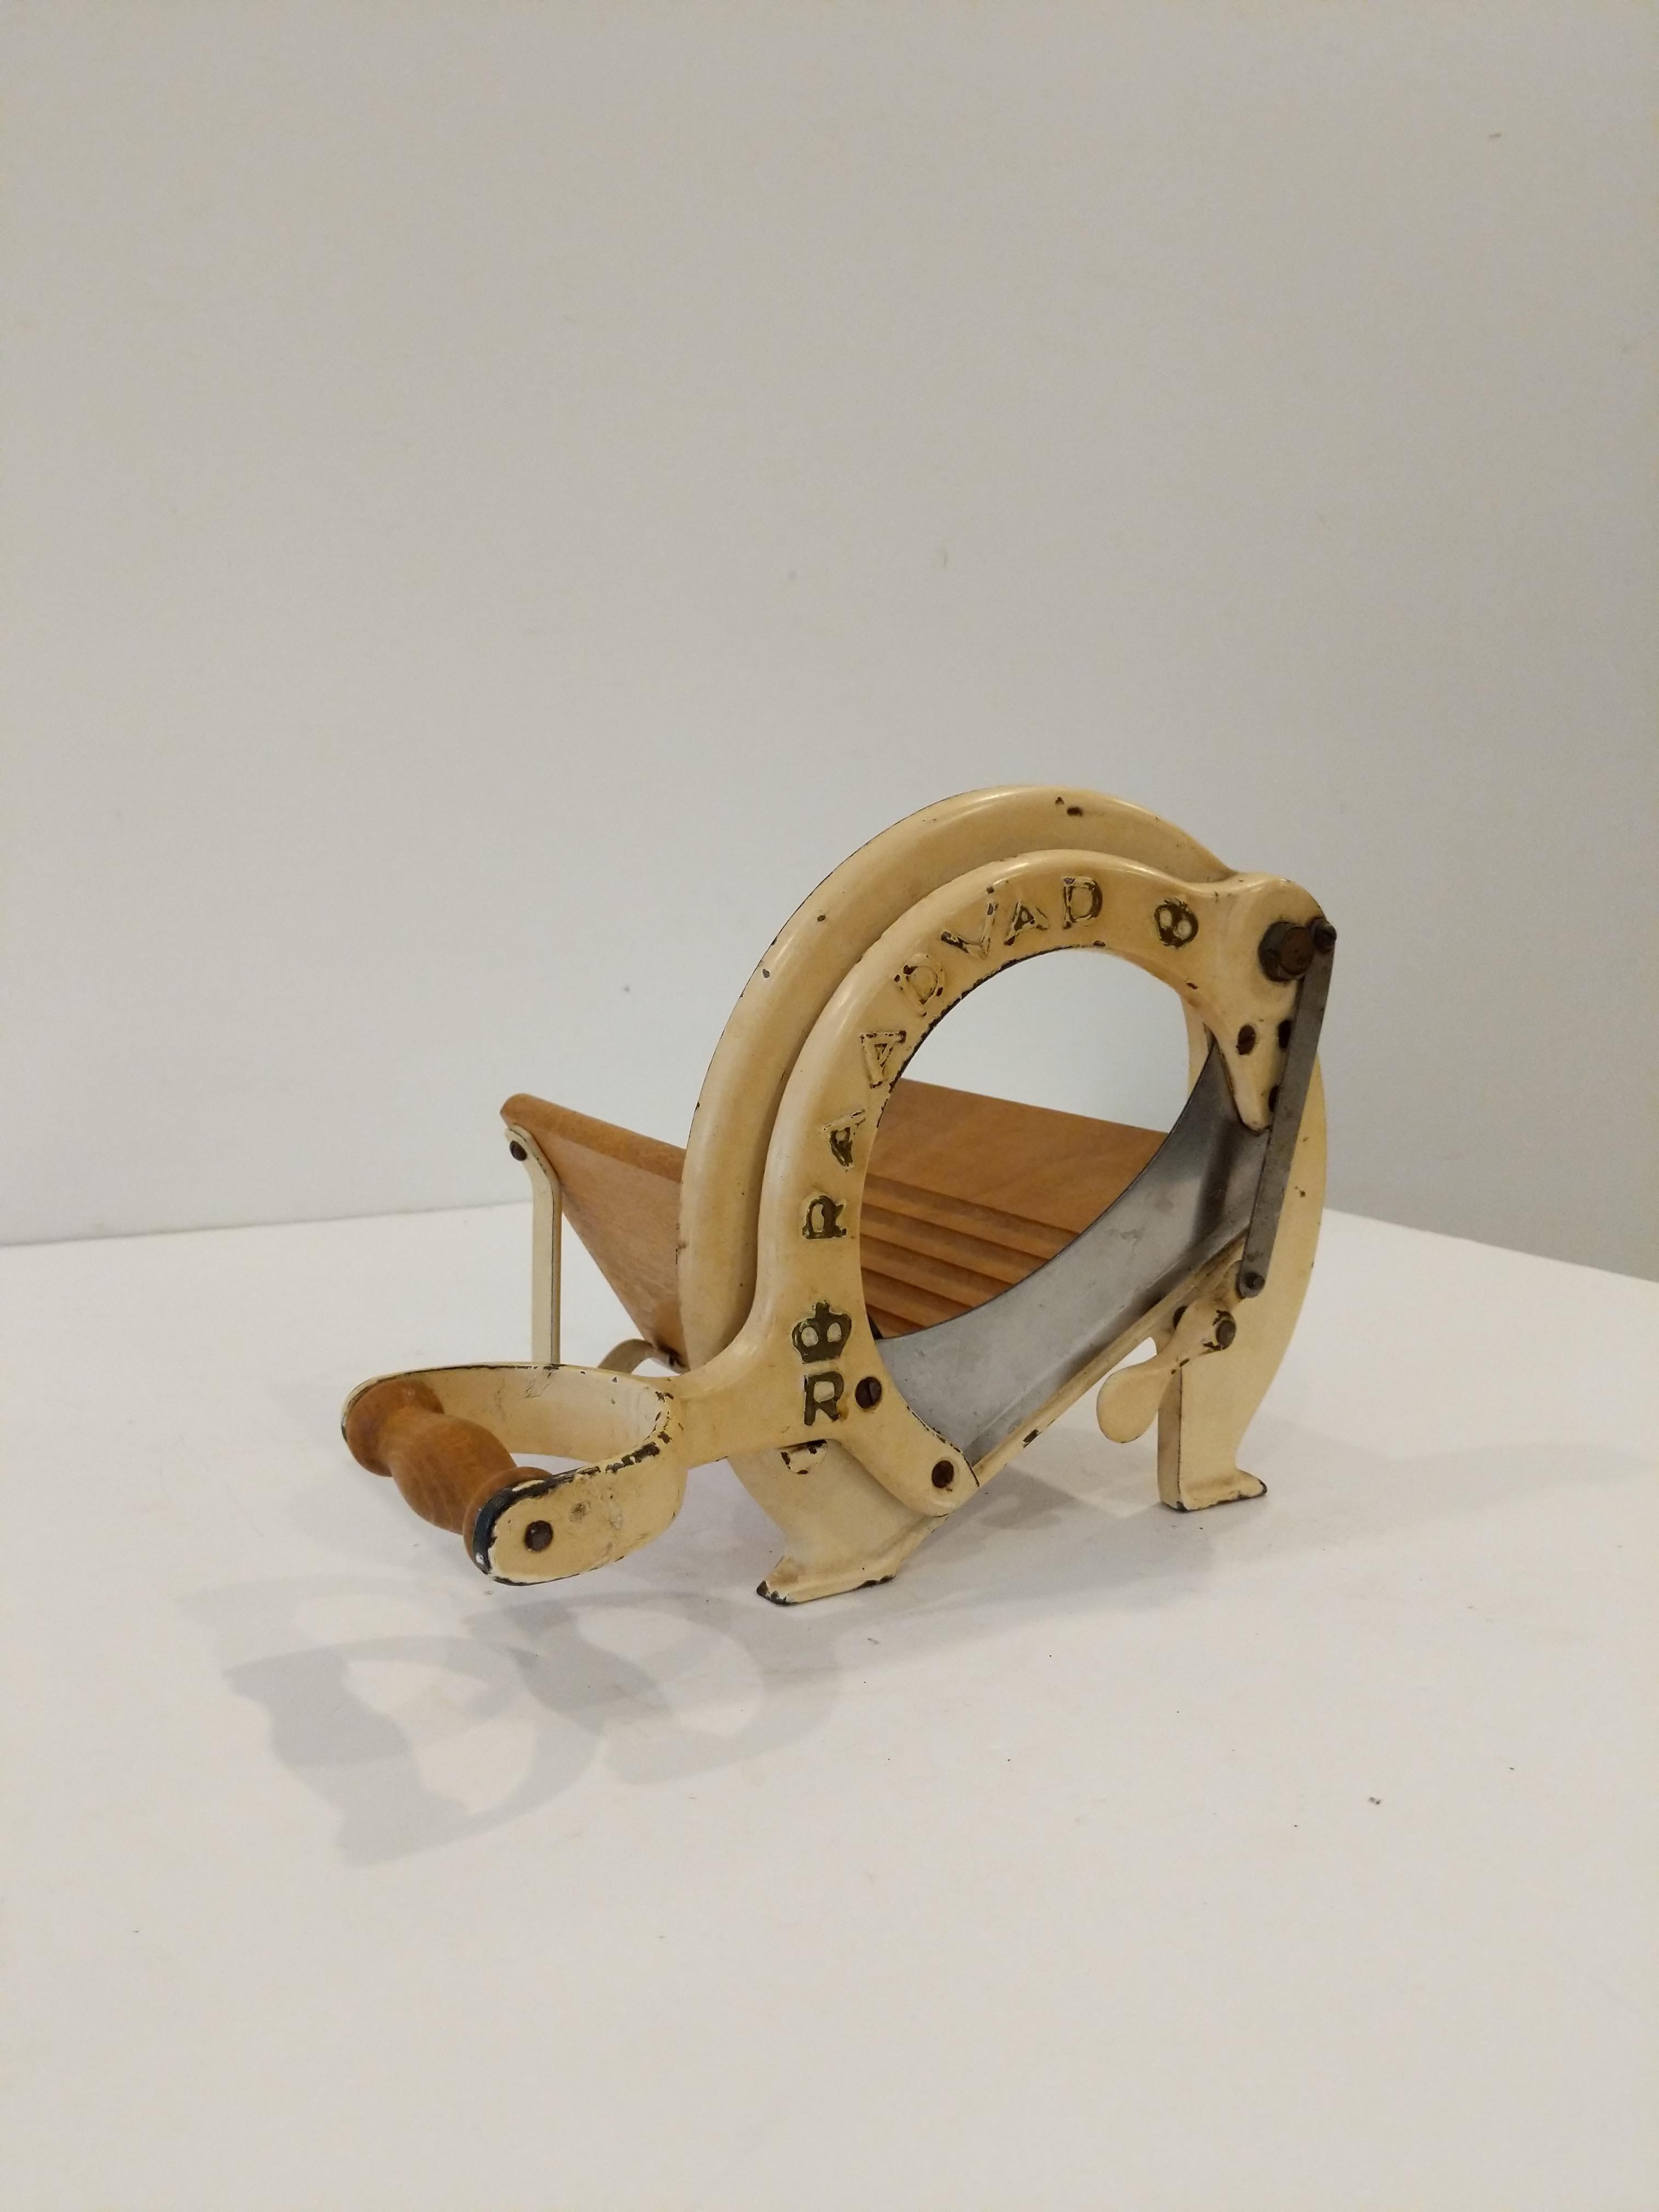 Authentic vintage Danish bread slicer / guillotine in cream.

Model 294 by Raadvad.

This slicer is in good condition overall and expectedly shows its age a bit.

Dimensions:
13.5” Long including handle
9.5” Tall
8” Wide

Ref: RV27-021